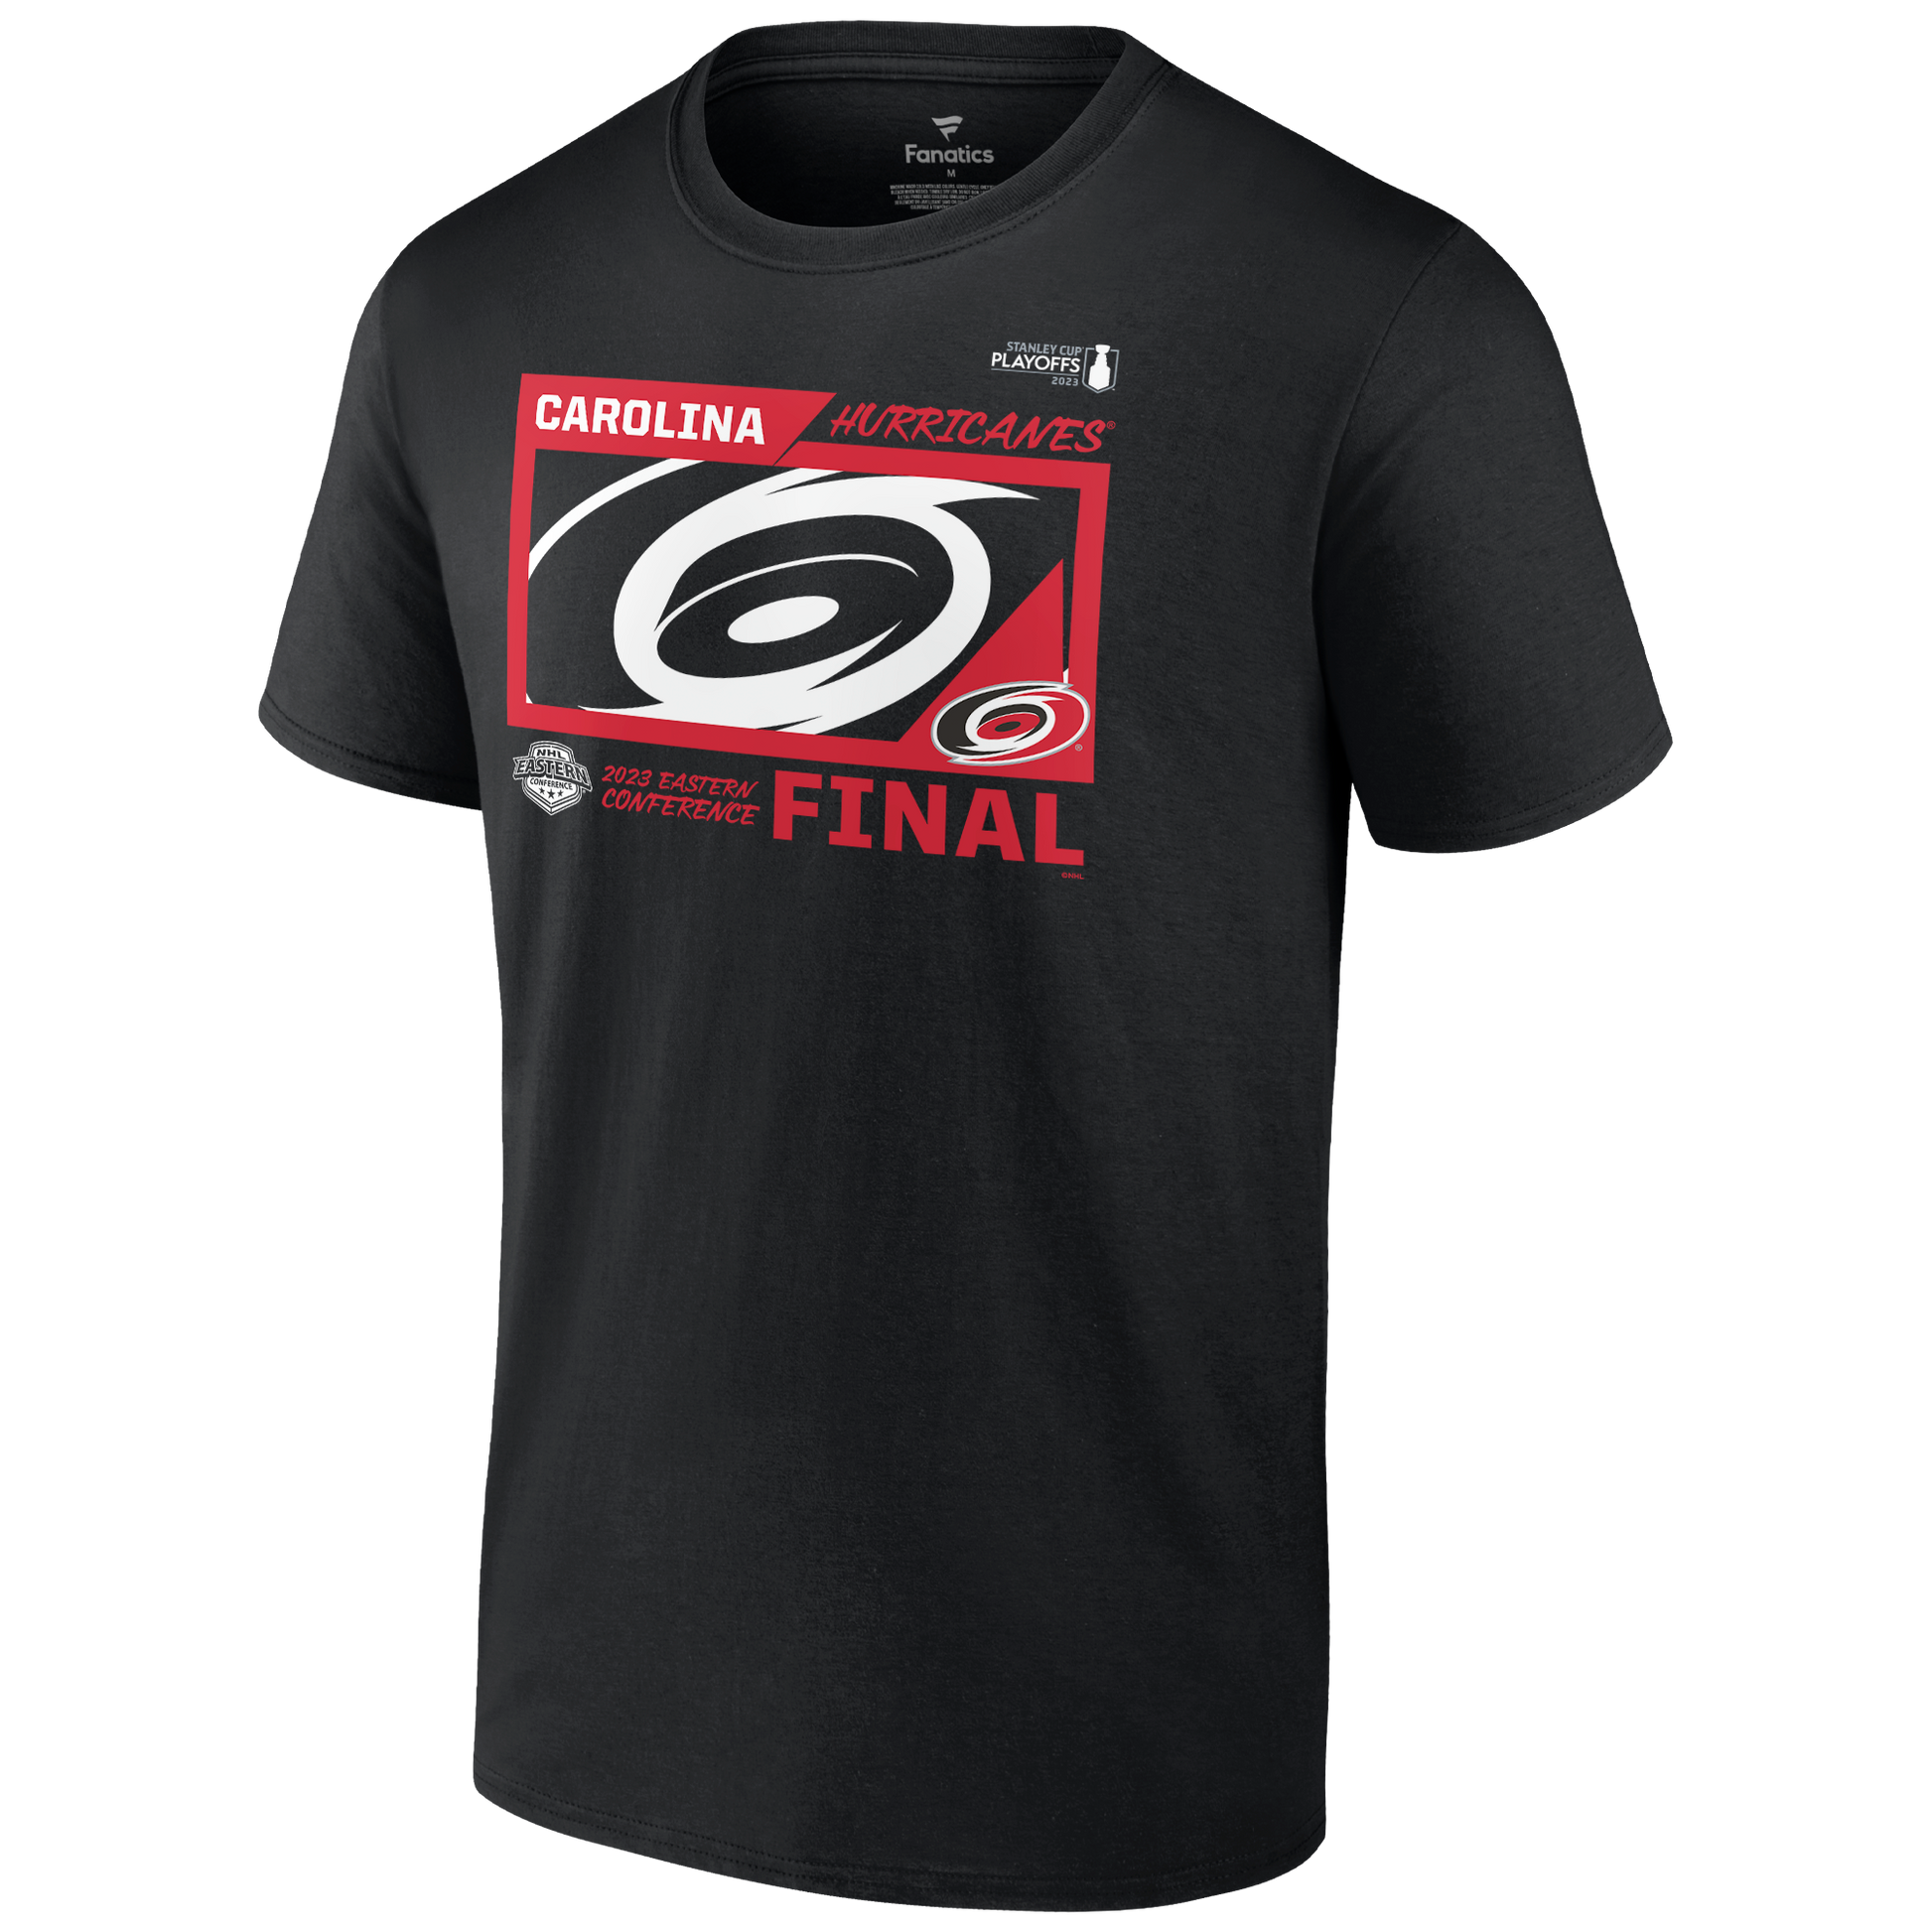 Front: Black tee with red and white graphic says Carolina Hurricanes 2023 Eastern Conference Final